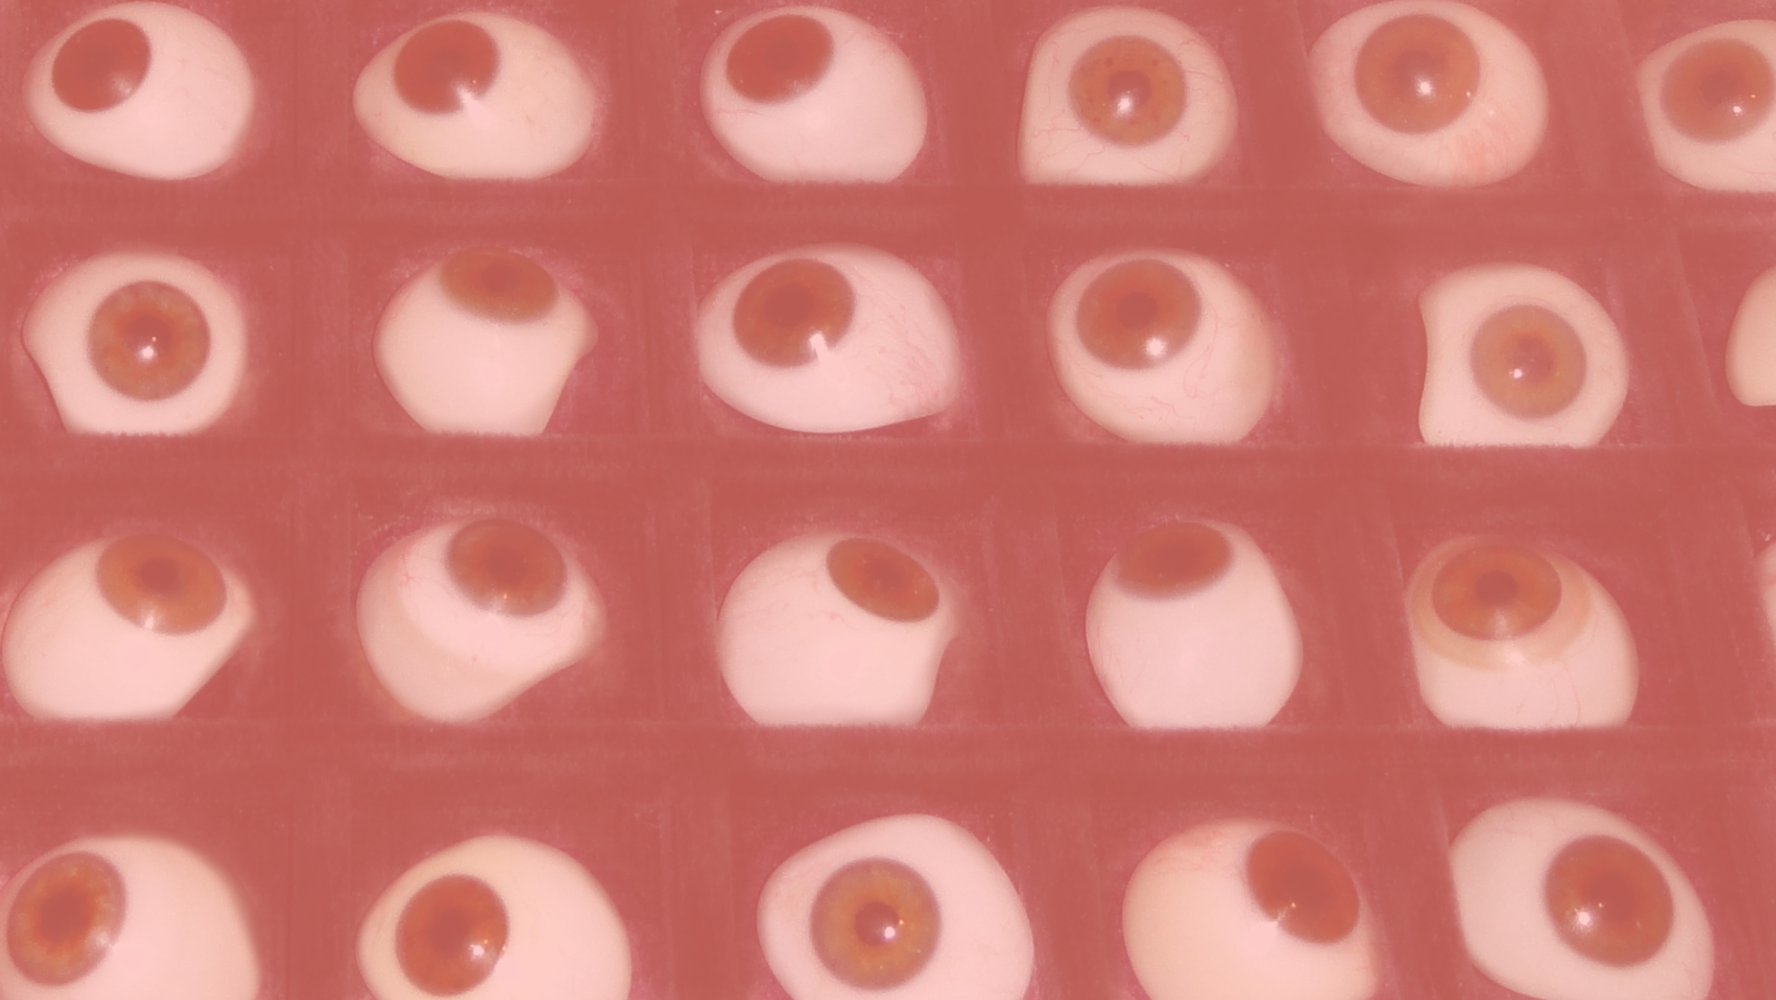 Array of glass eyes with a semi-transparent salmon-coloured overlay.